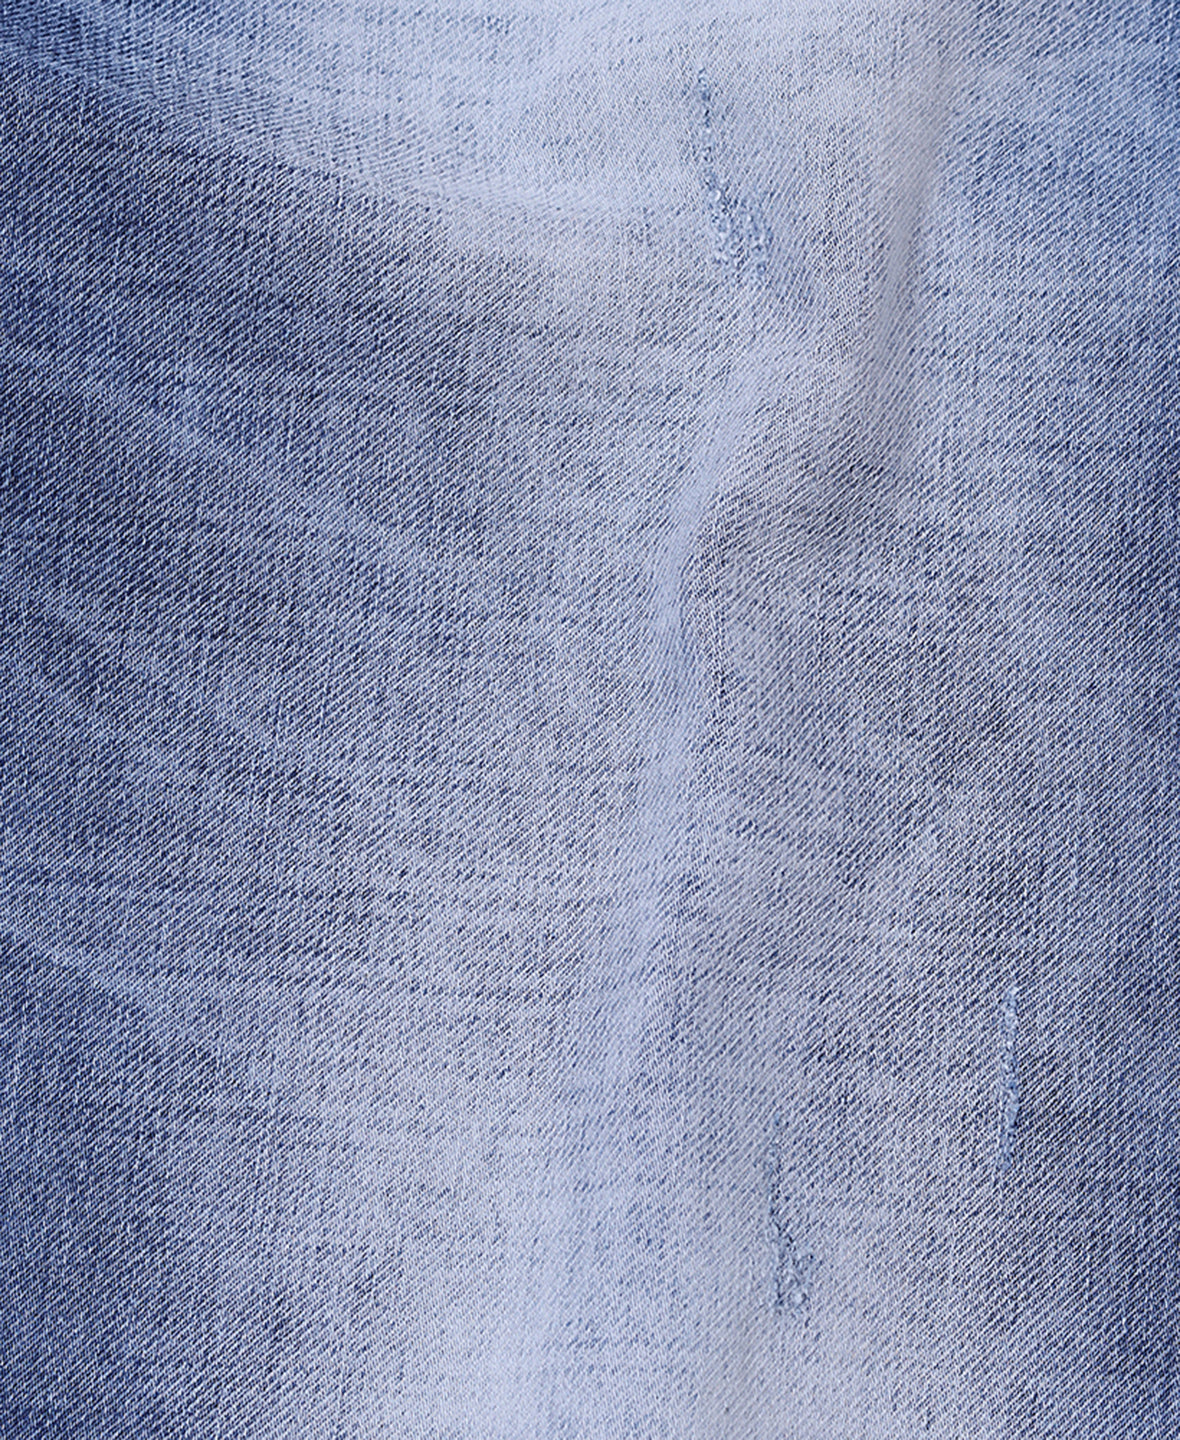 PAINT AND EMBROIDERY DETIAL JEANS <BR> Motif - mid blue